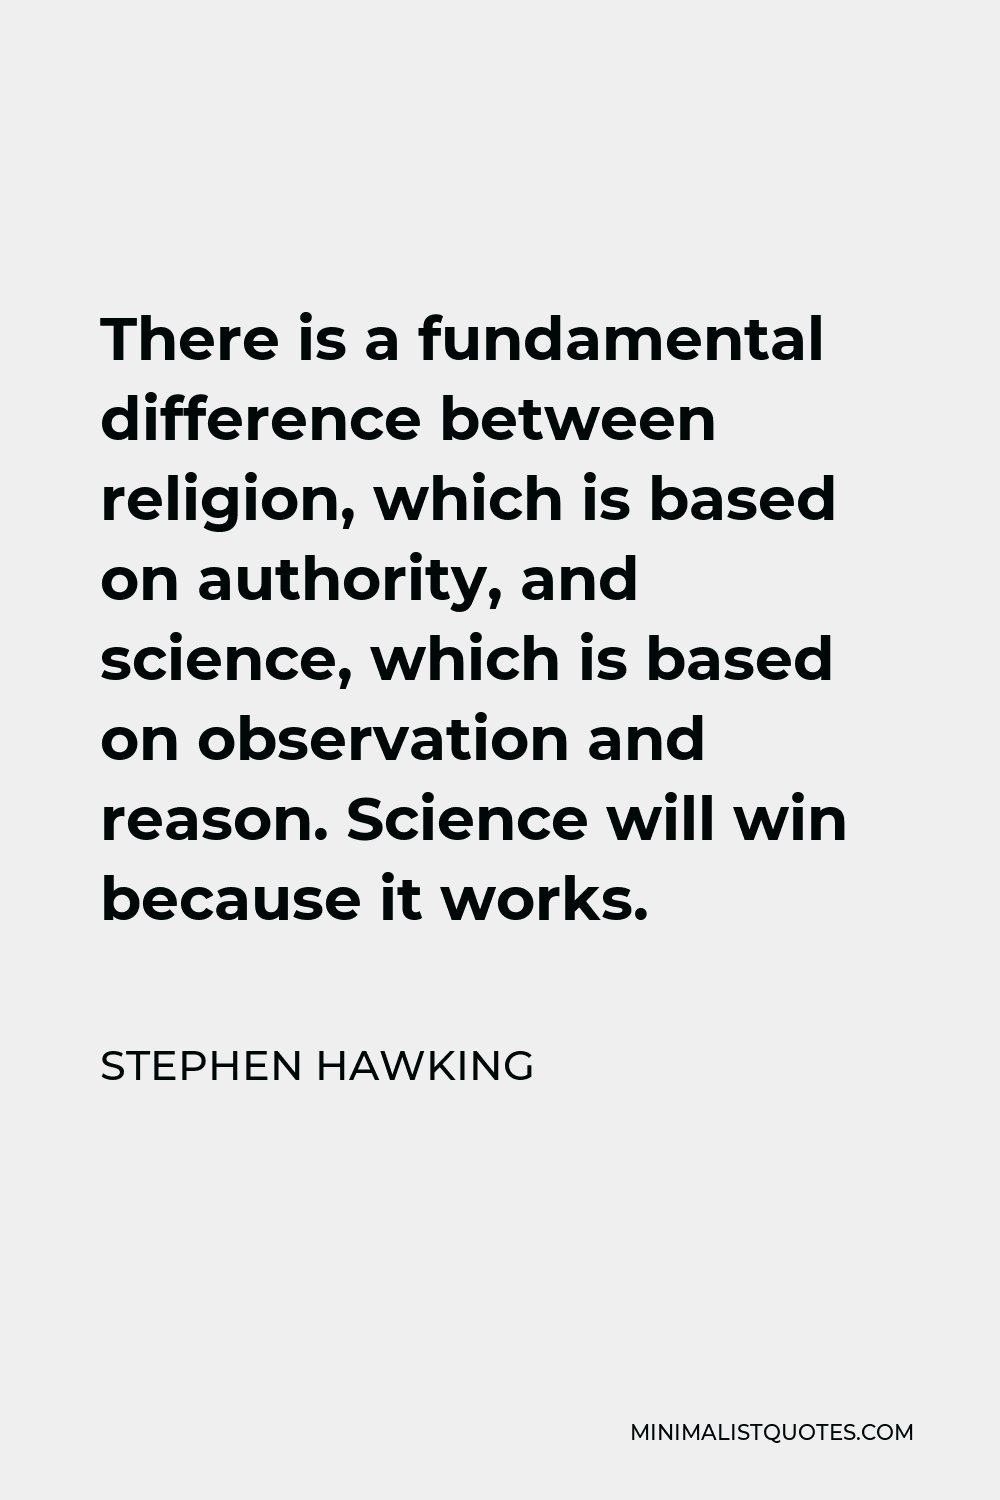 Stephen Hawking Quote - There is a fundamental difference between religion, which is based on authority, and science, which is based on observation and reason. Science will win because it works.